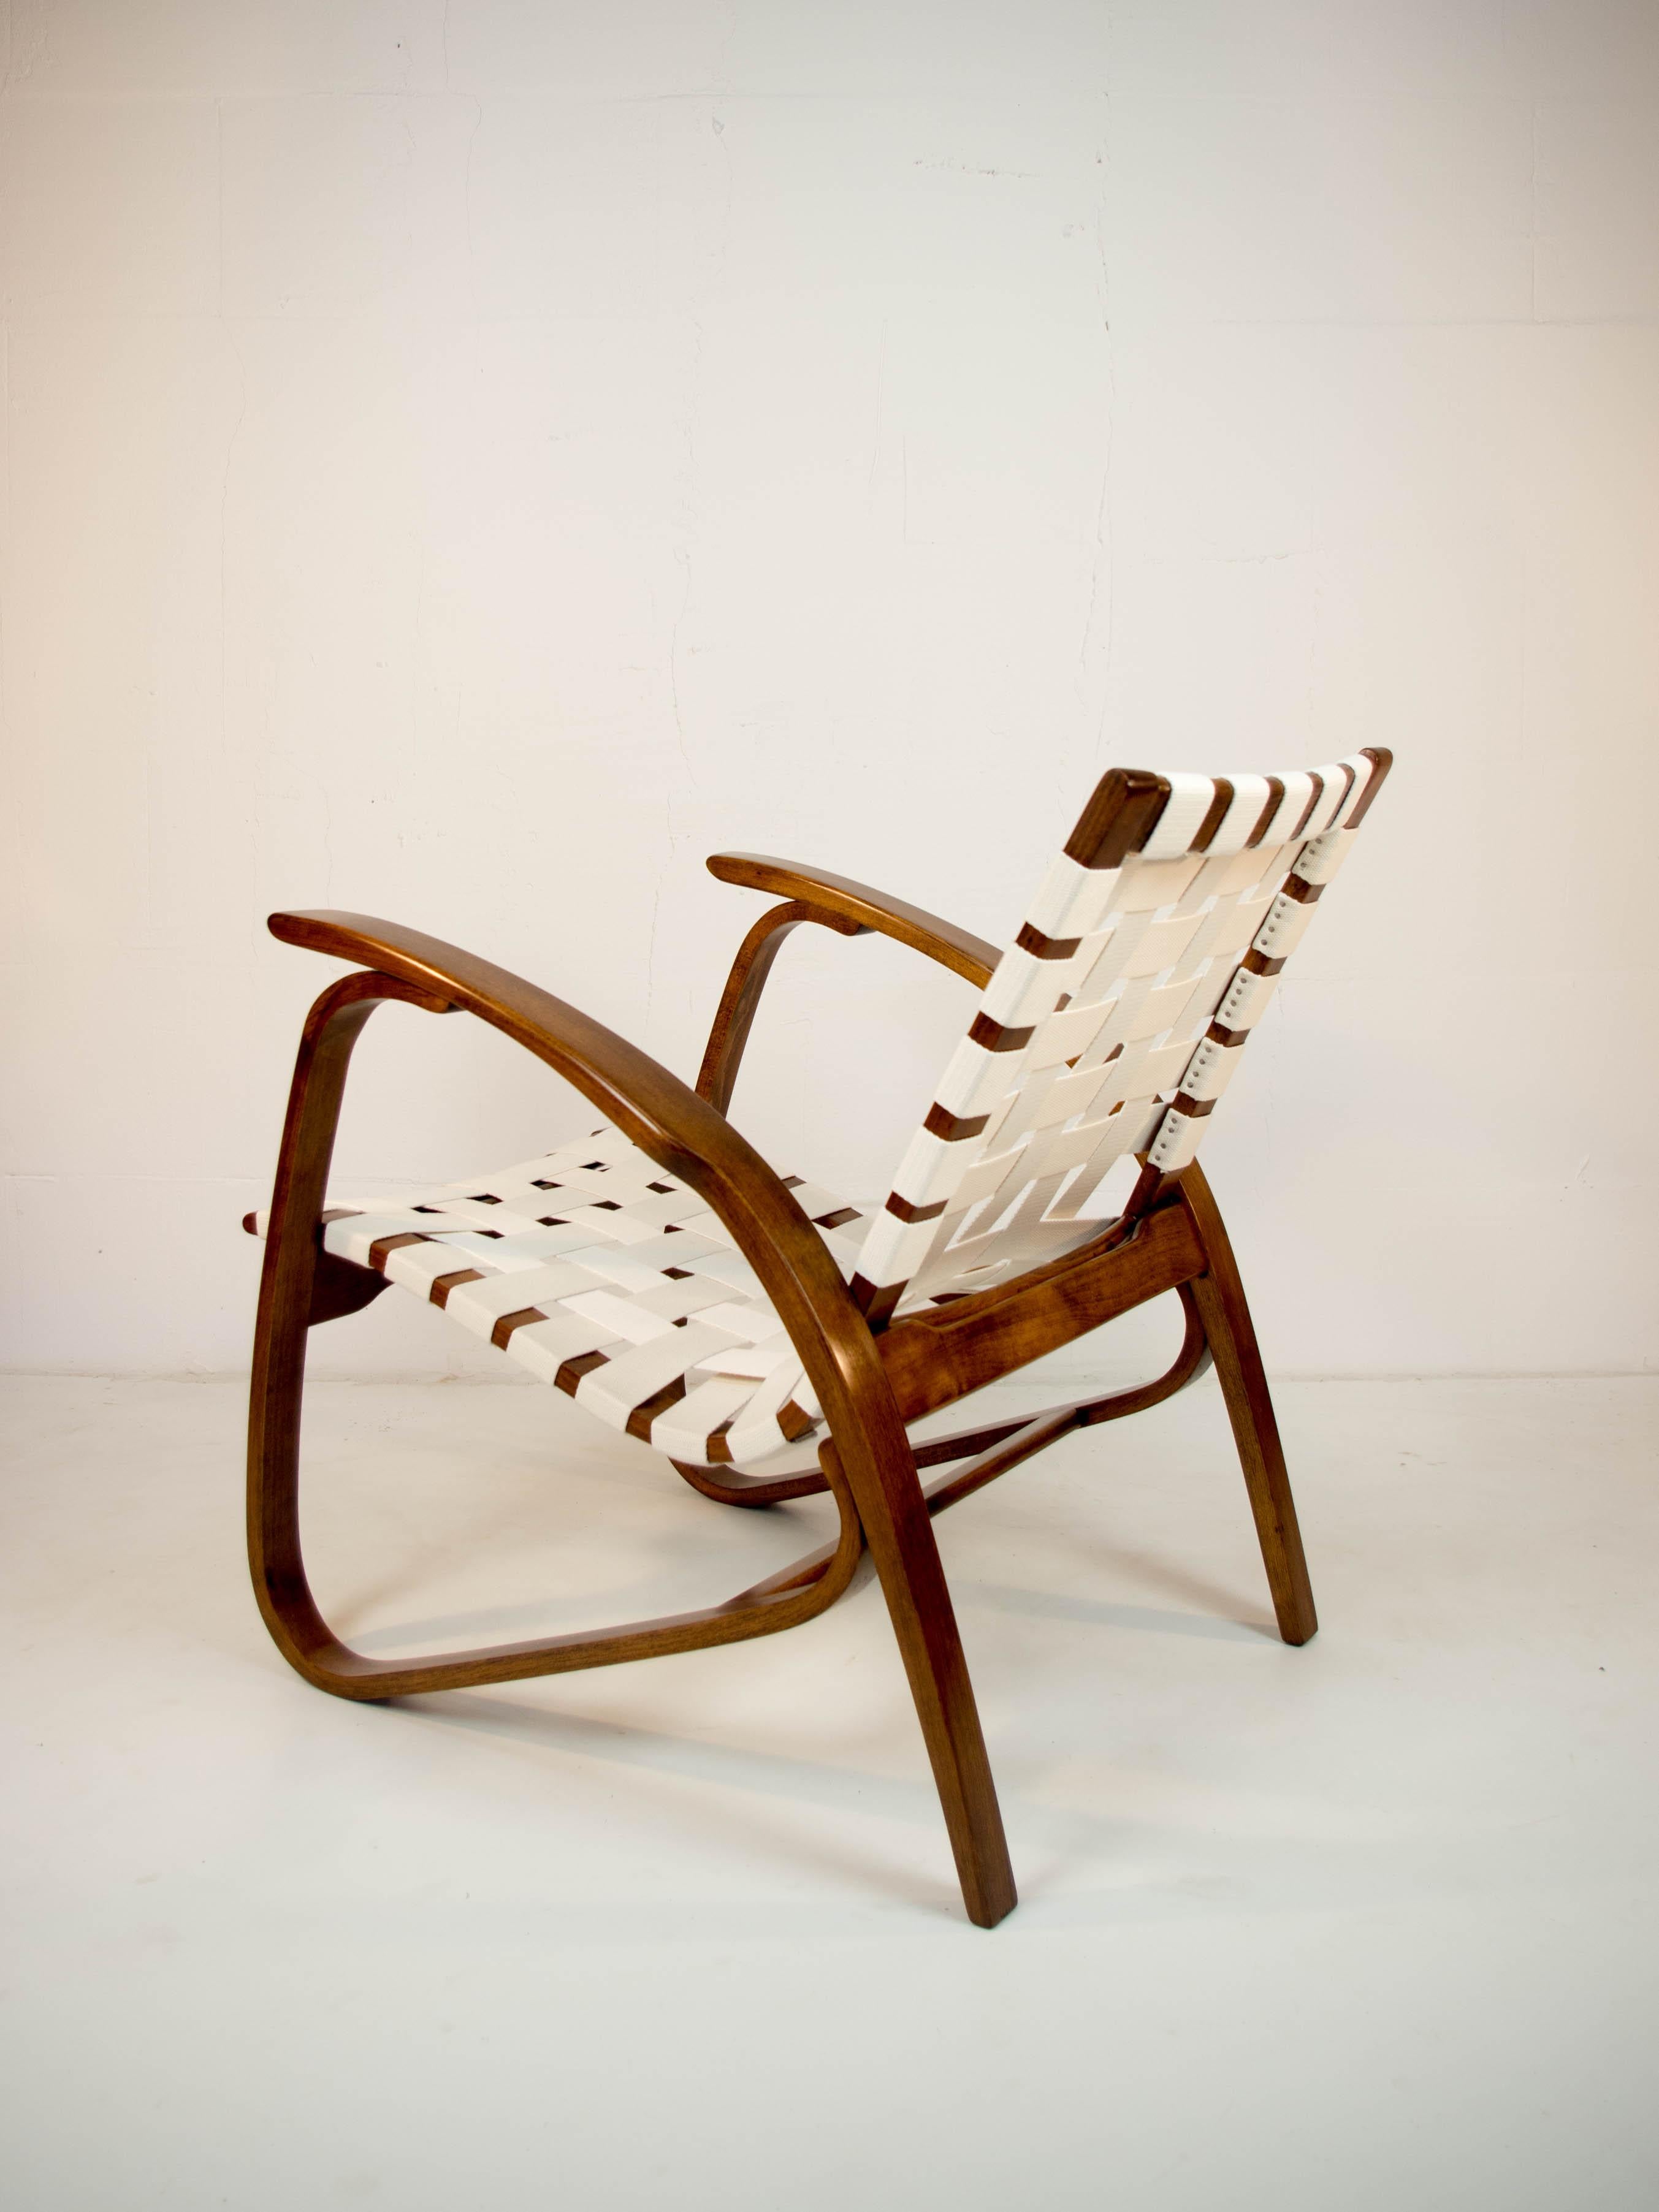 Iconic beech bentwood armchair by Jan Vanek. Very comfortable and eye-catching piece! Proffesionally restored: wood refurbished, new straps. 7 items available. Colour of the wood on demand. Production time 2-3 weeks.